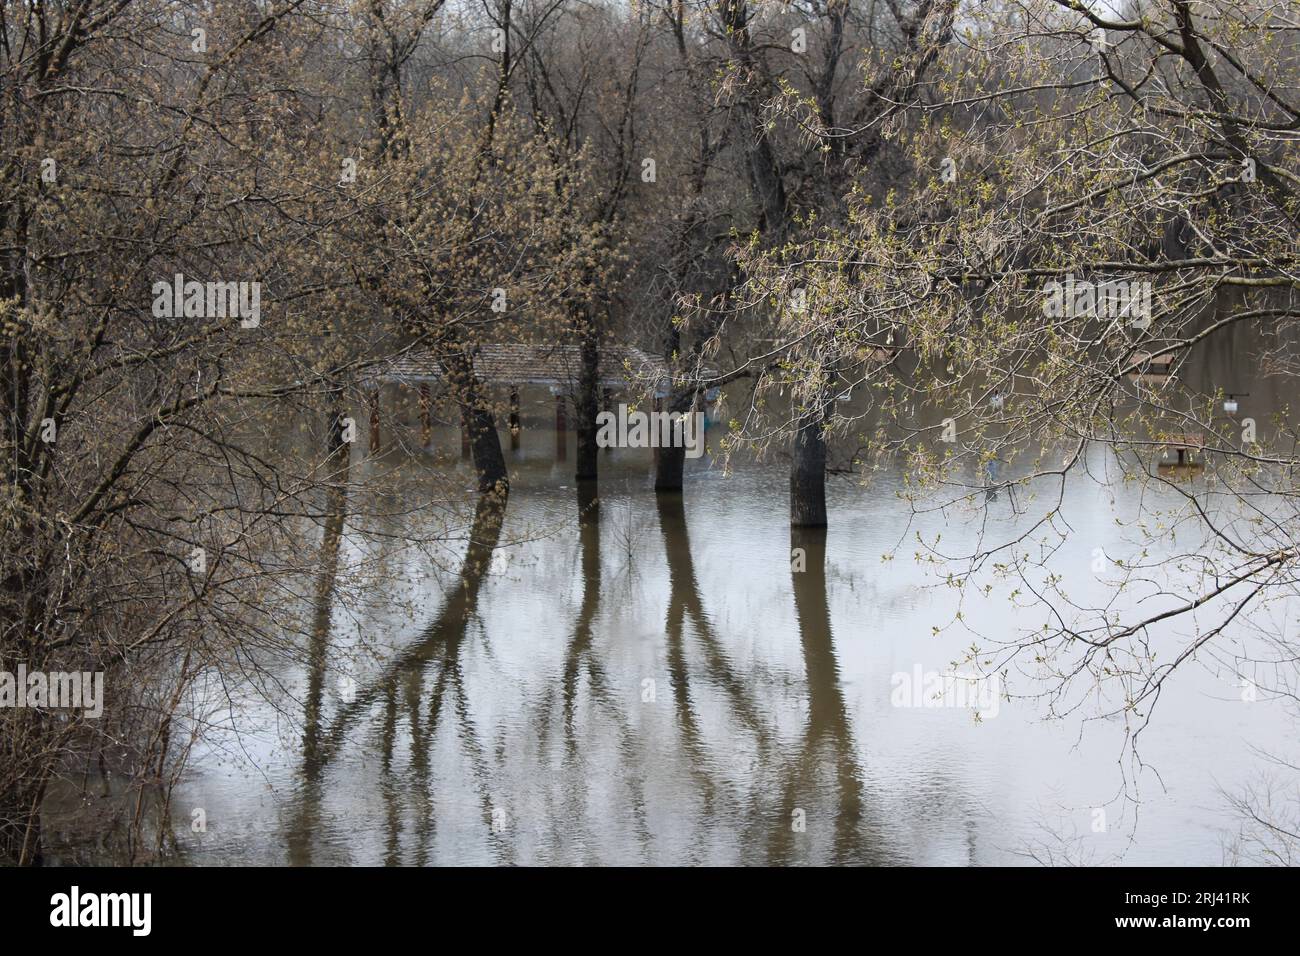 A serene image of a Minnesota lake, featuring flooding trees and their peaceful reflections on the water's surface Stock Photo